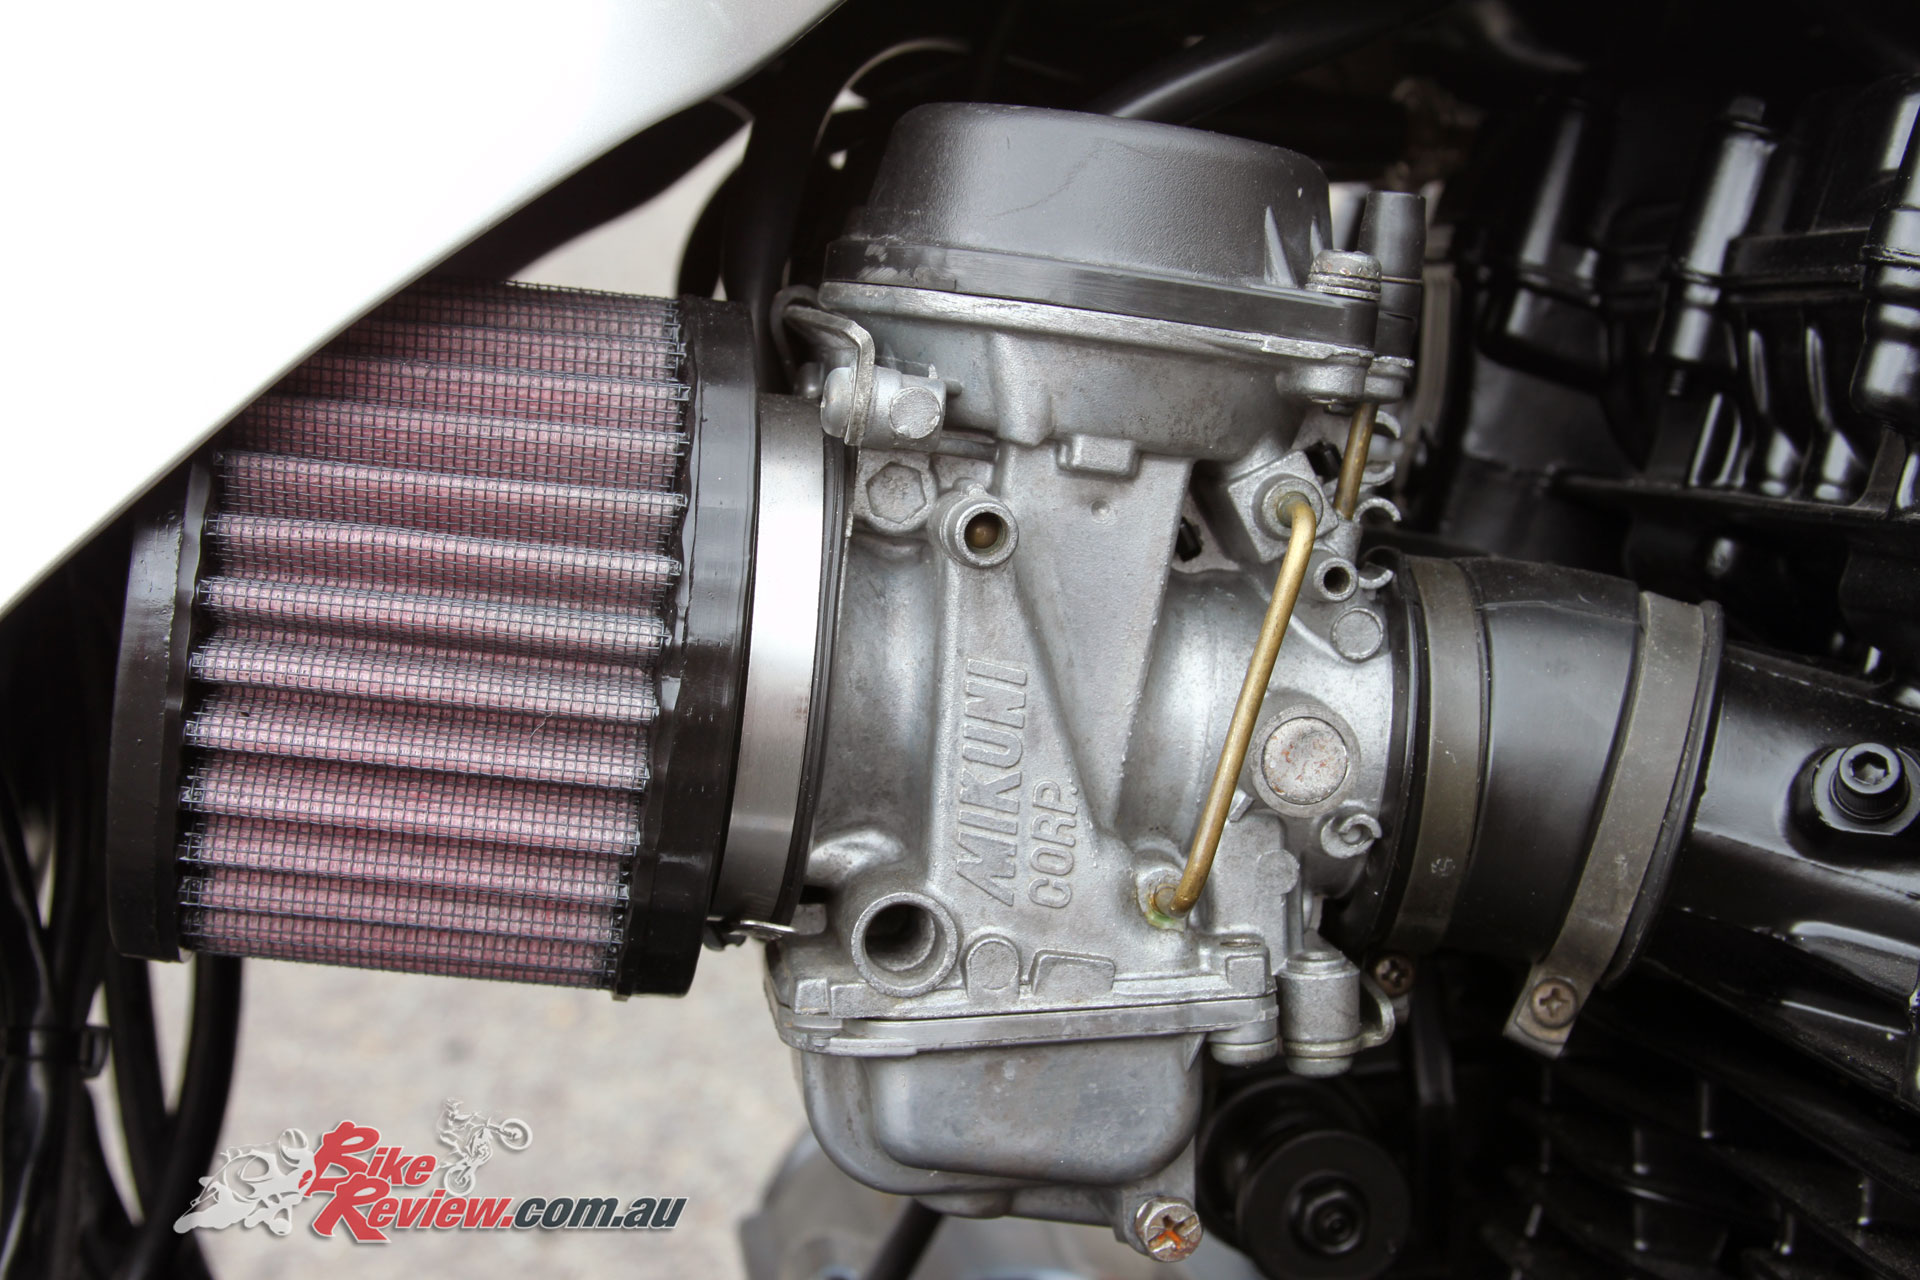 Engine mods include Mikuni CV 36mm carbies, Yoshimura camshafts, K&N pod filters, and a heavy duty clutch